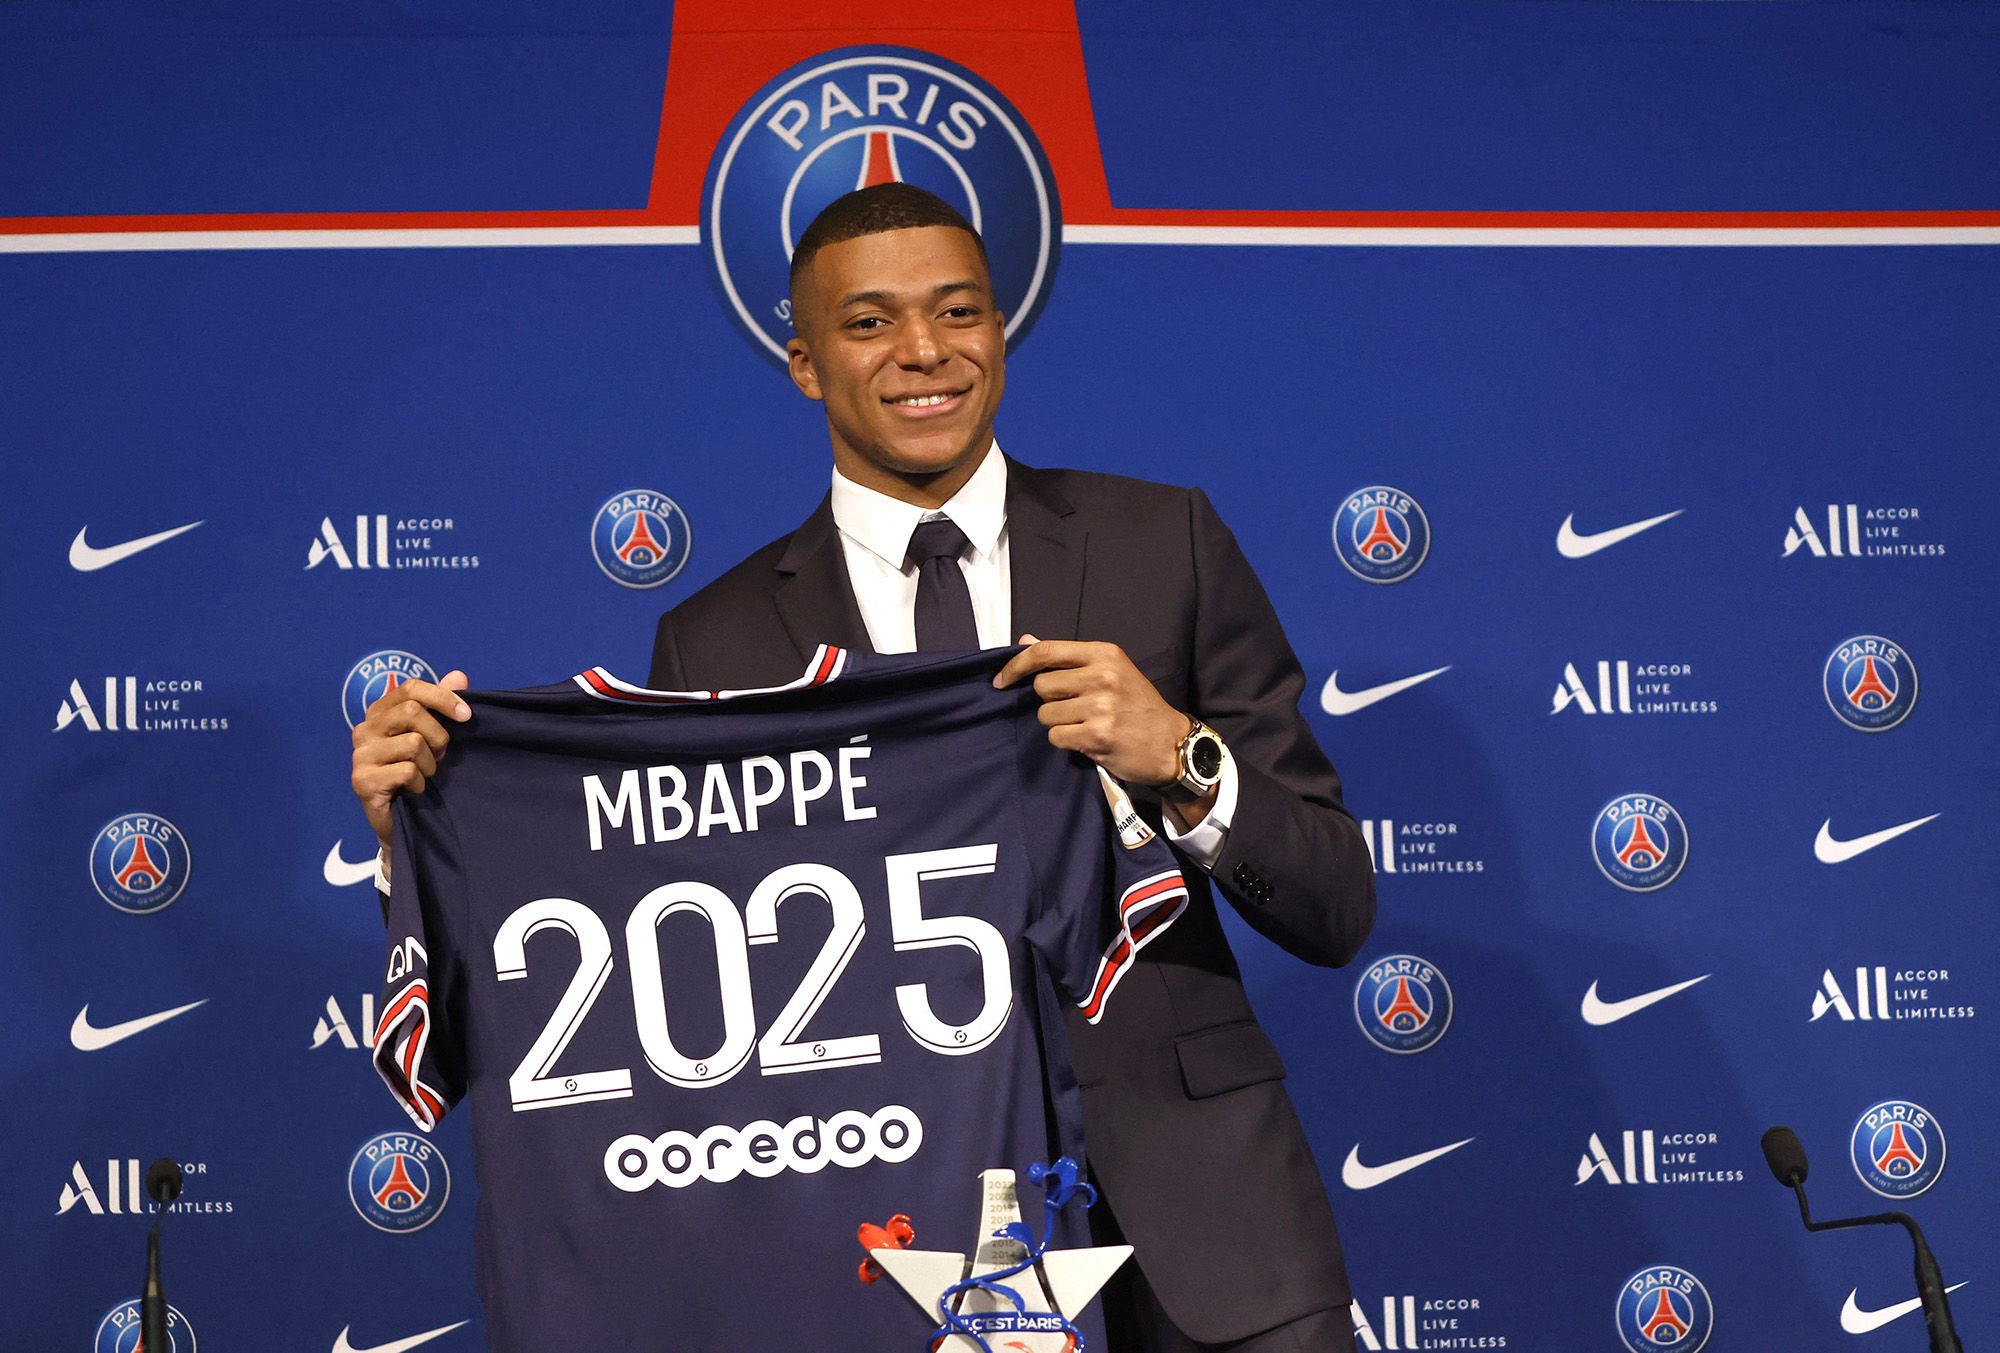 Kylian Mbappe informs PSG he will not extend contract: Media, Football  News